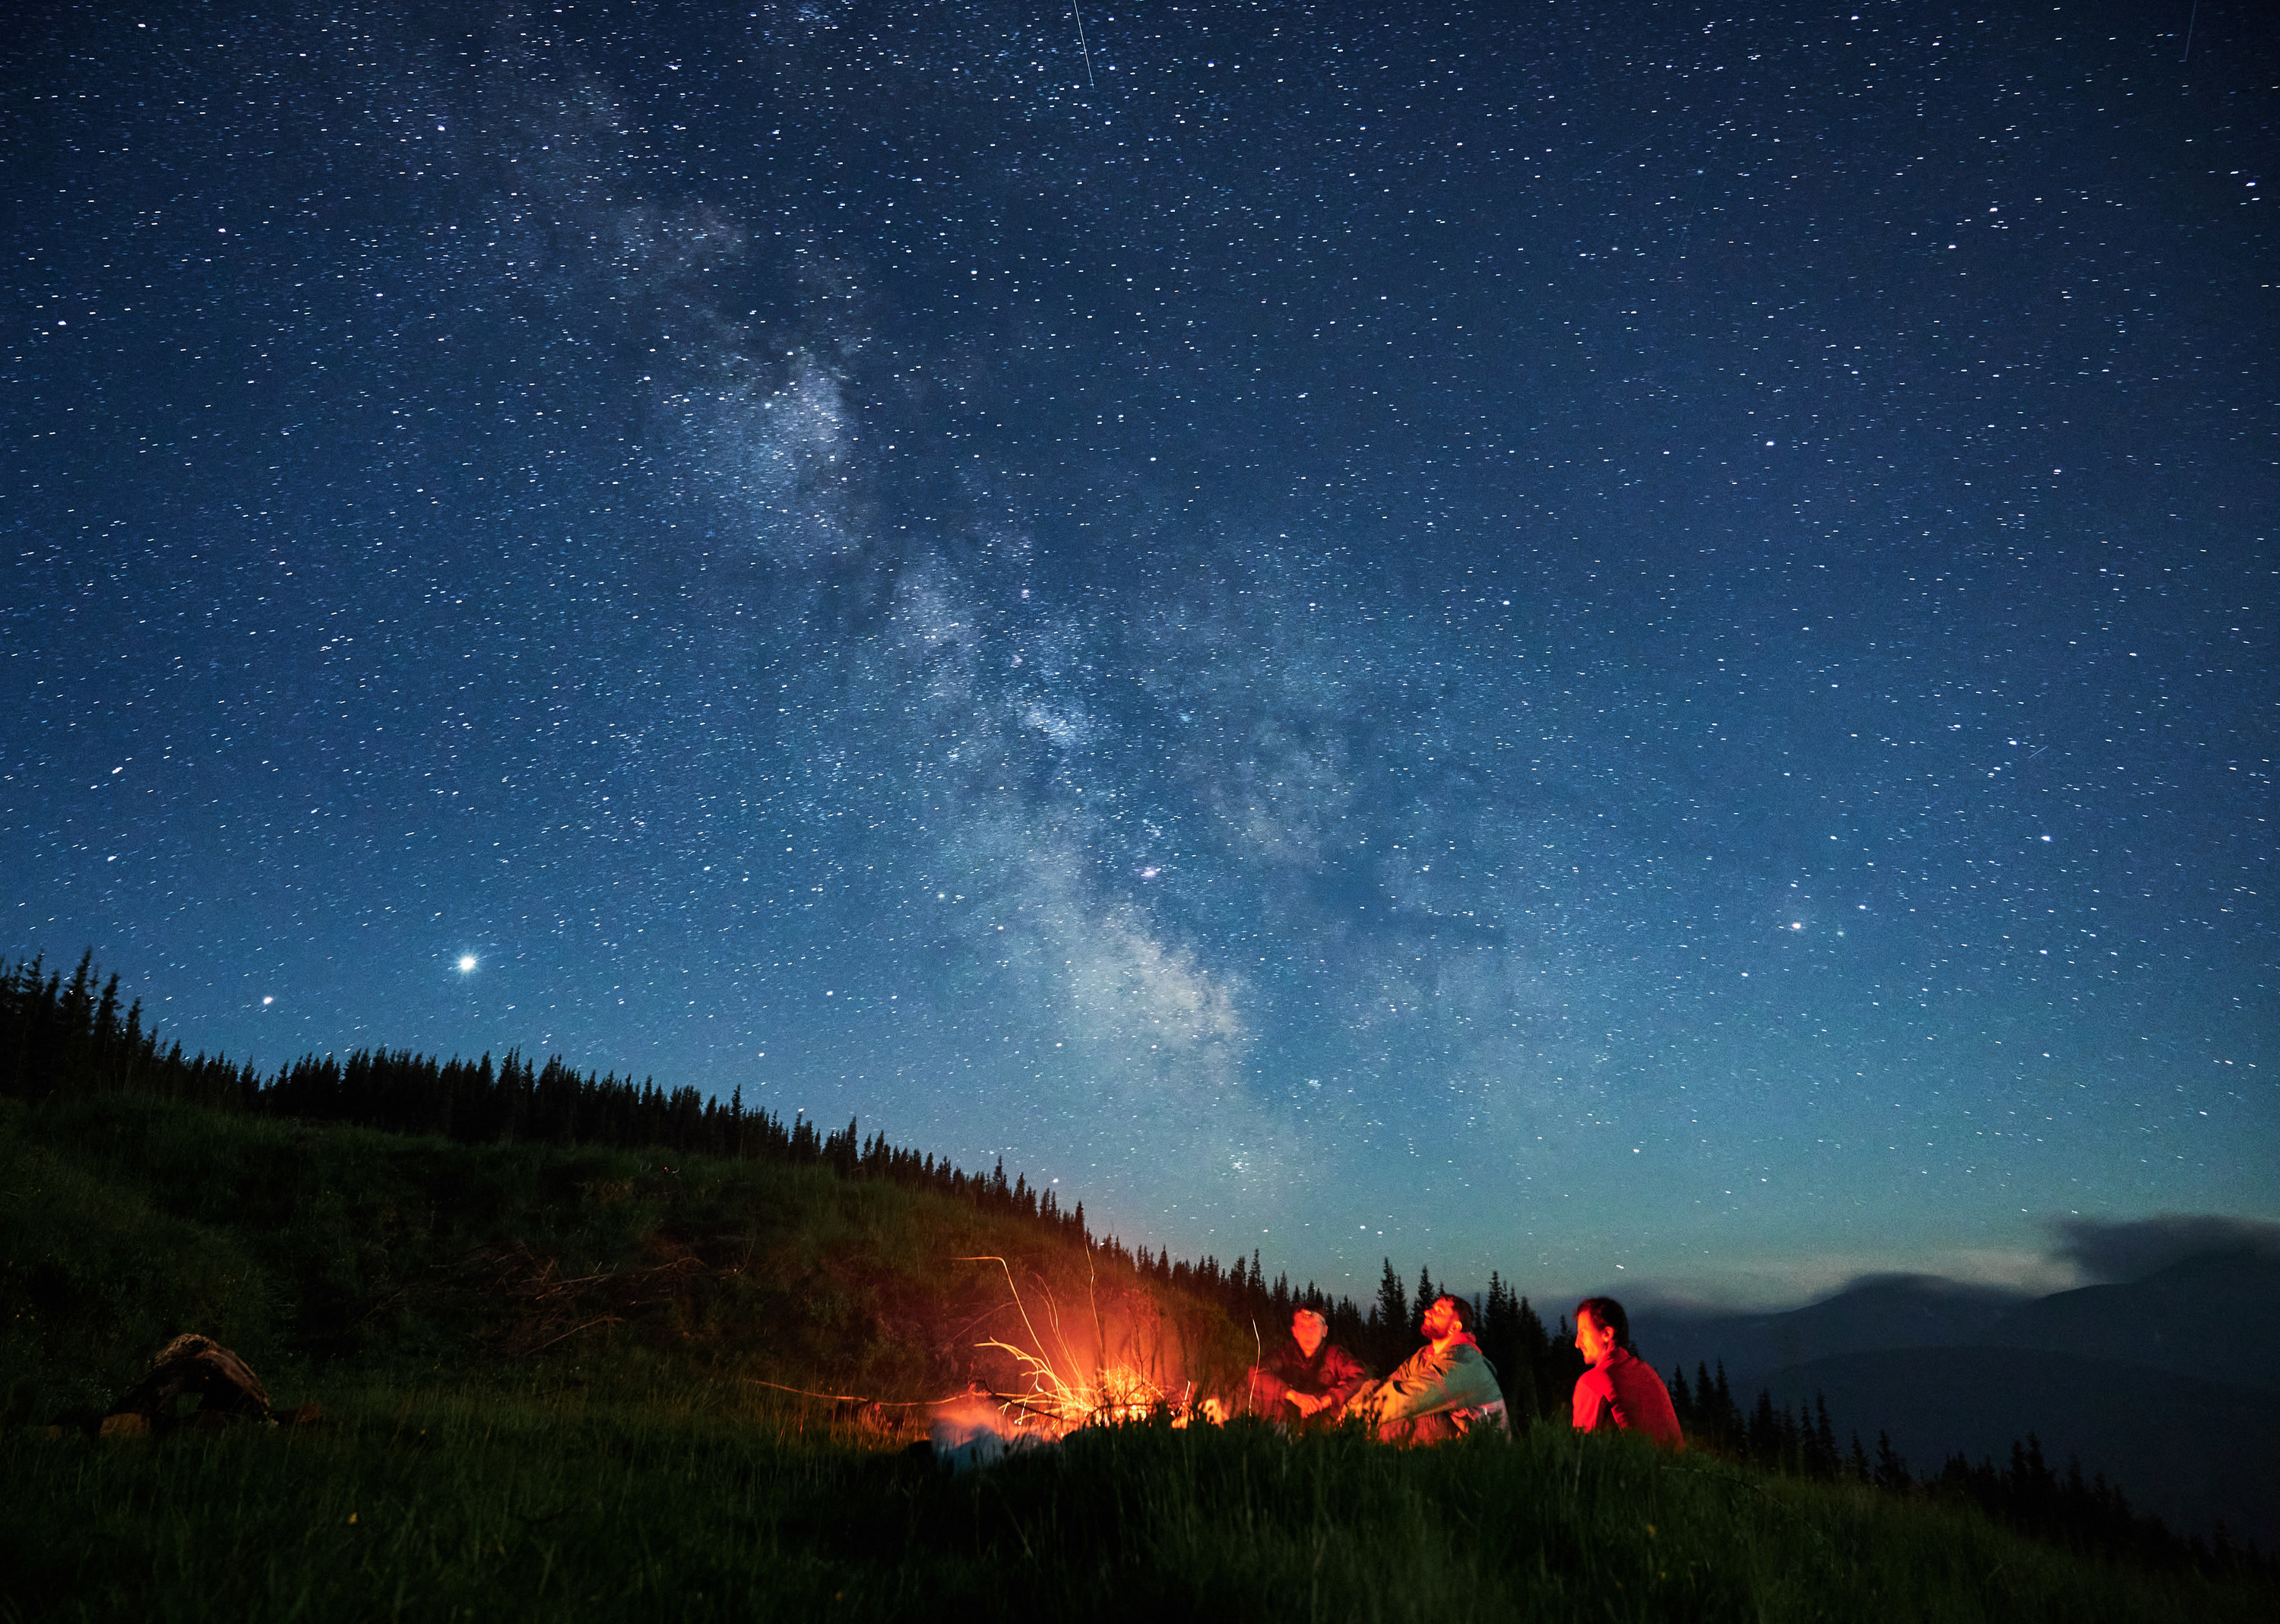 People around a campfire under a starry sky